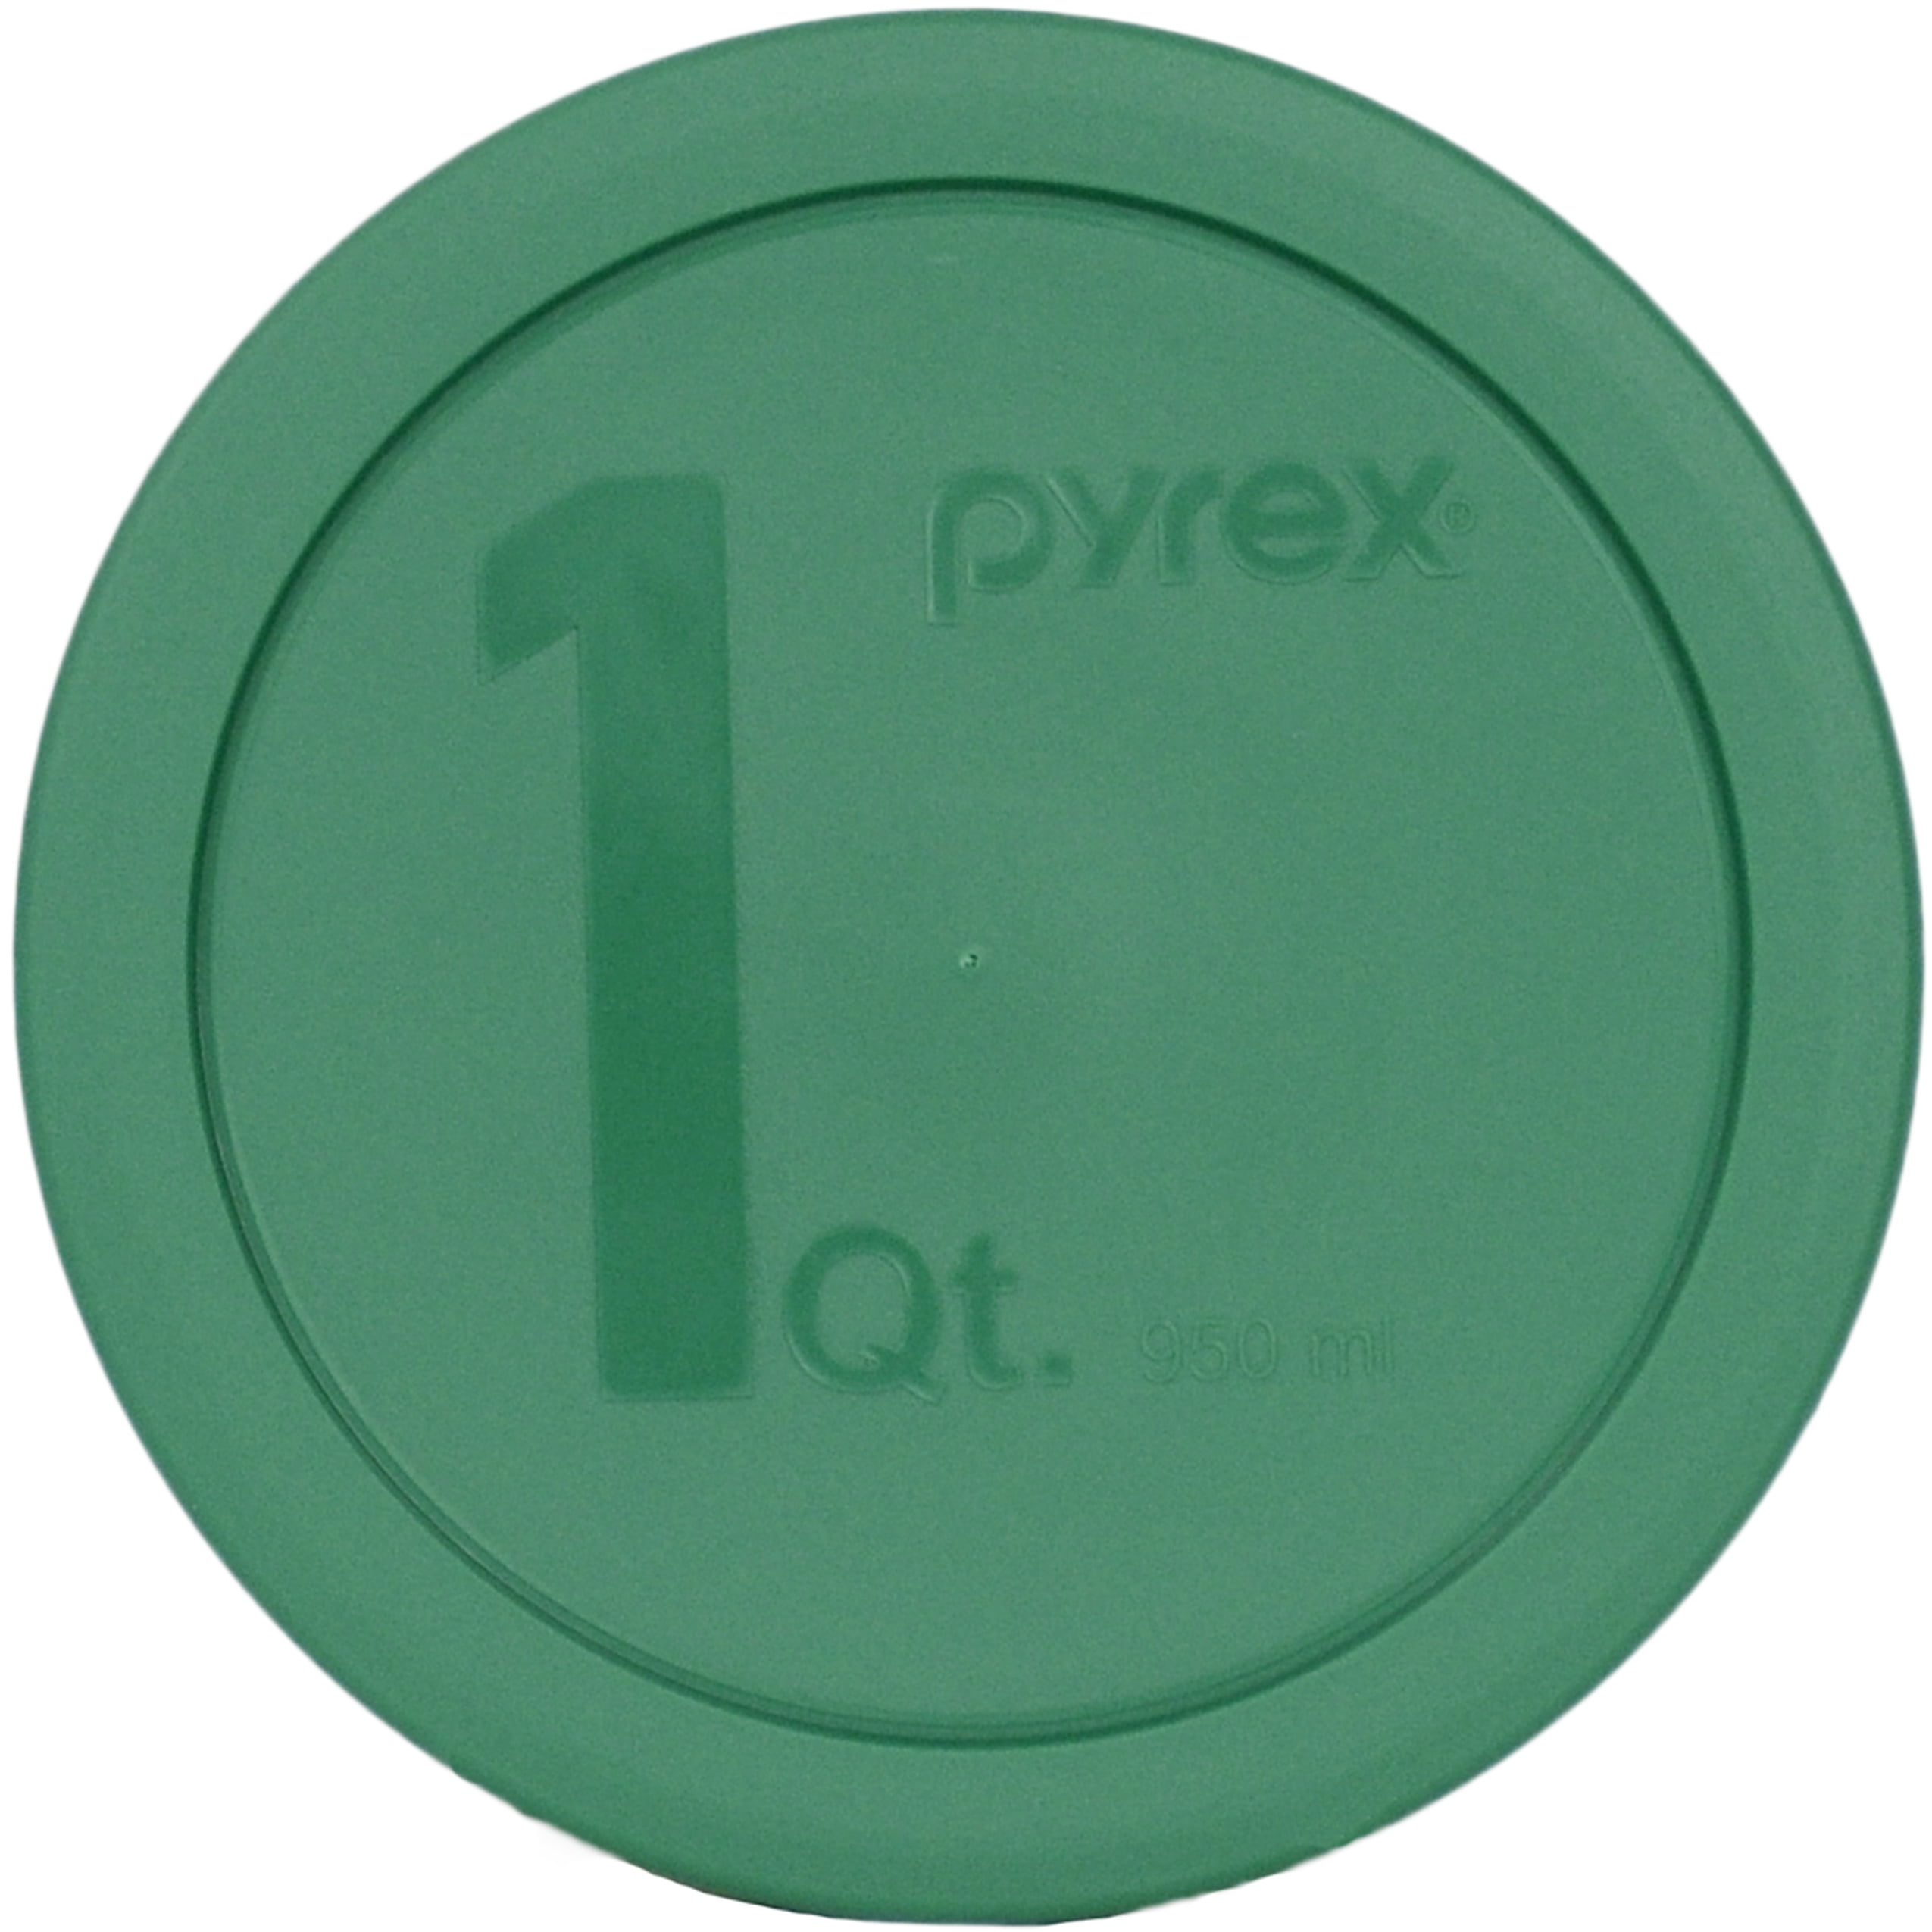 Pyrex 322-PC 1Qt Green Round Lid Cover 4 Pk for 322 Mixing Bowl NOT for 7201 